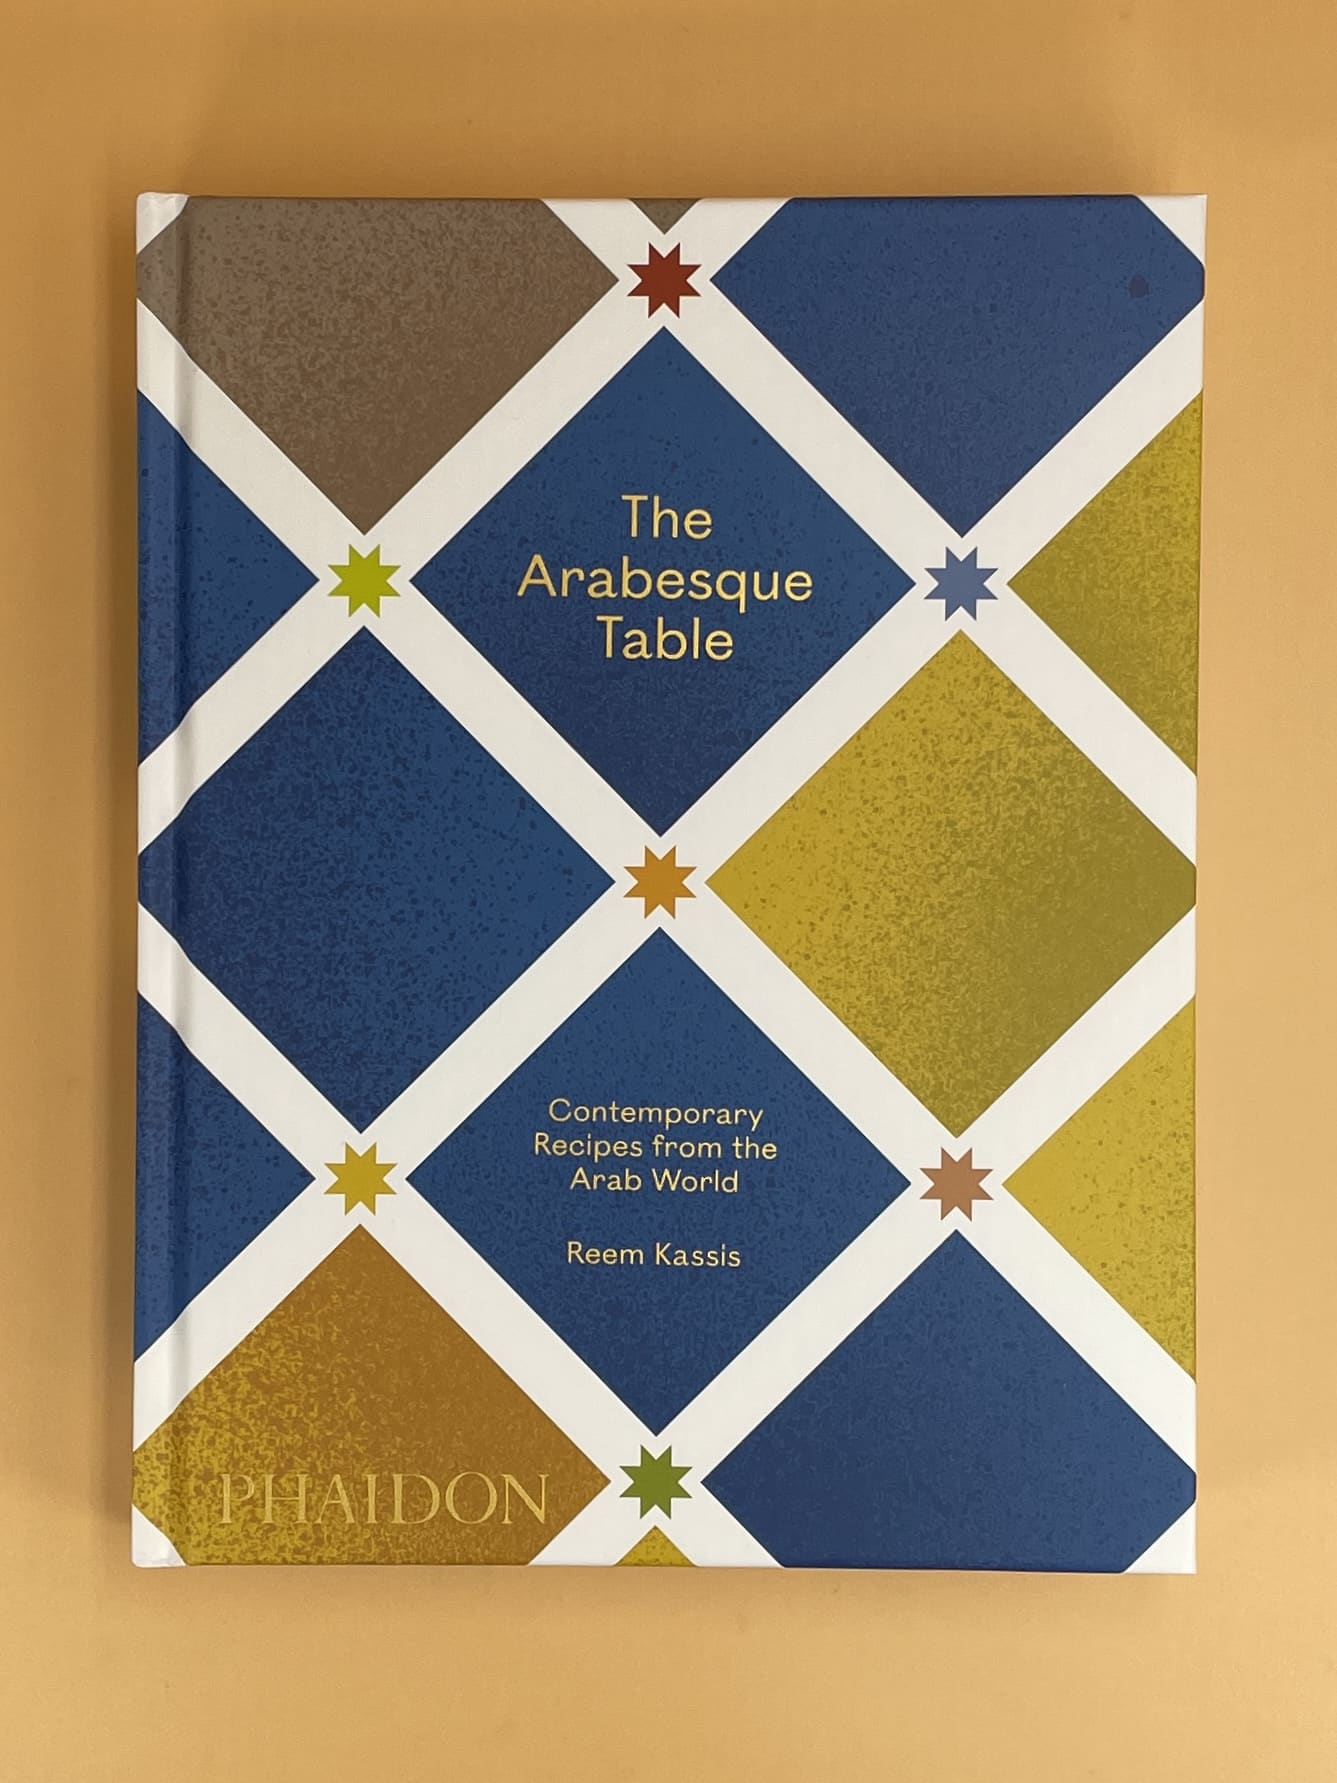 The Arabesque Table: Contemporary Recipes from the Arab World (Reem Kassis)